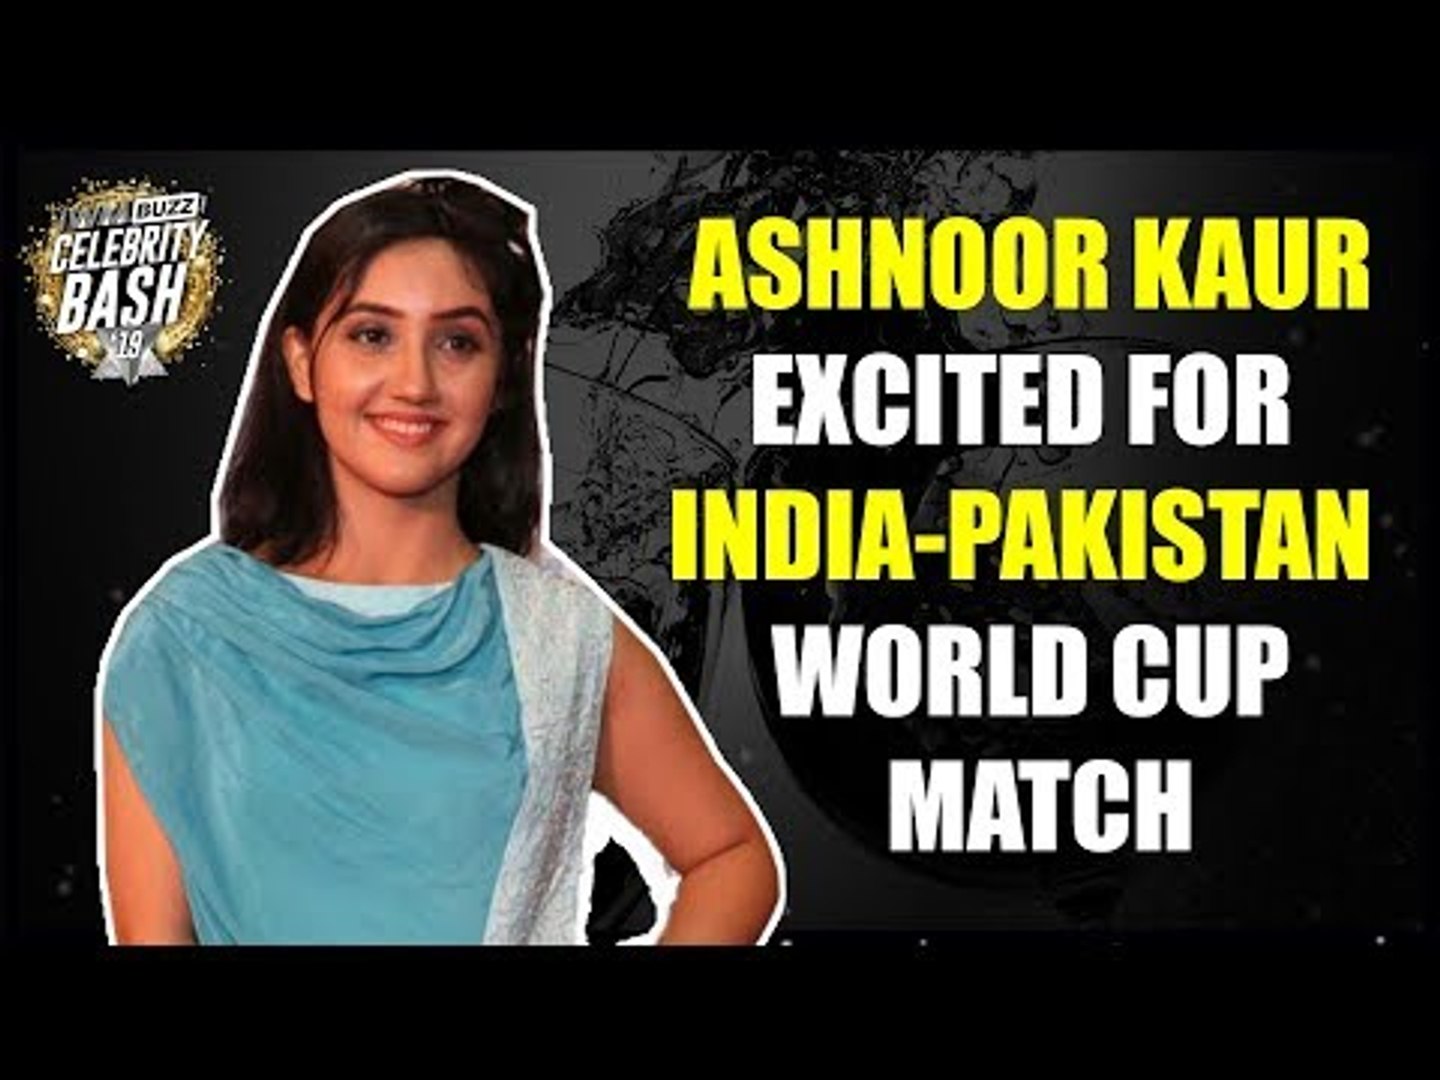 Exclusive: Ashnoor Kaur excited for India-Pakistan World Cup Match